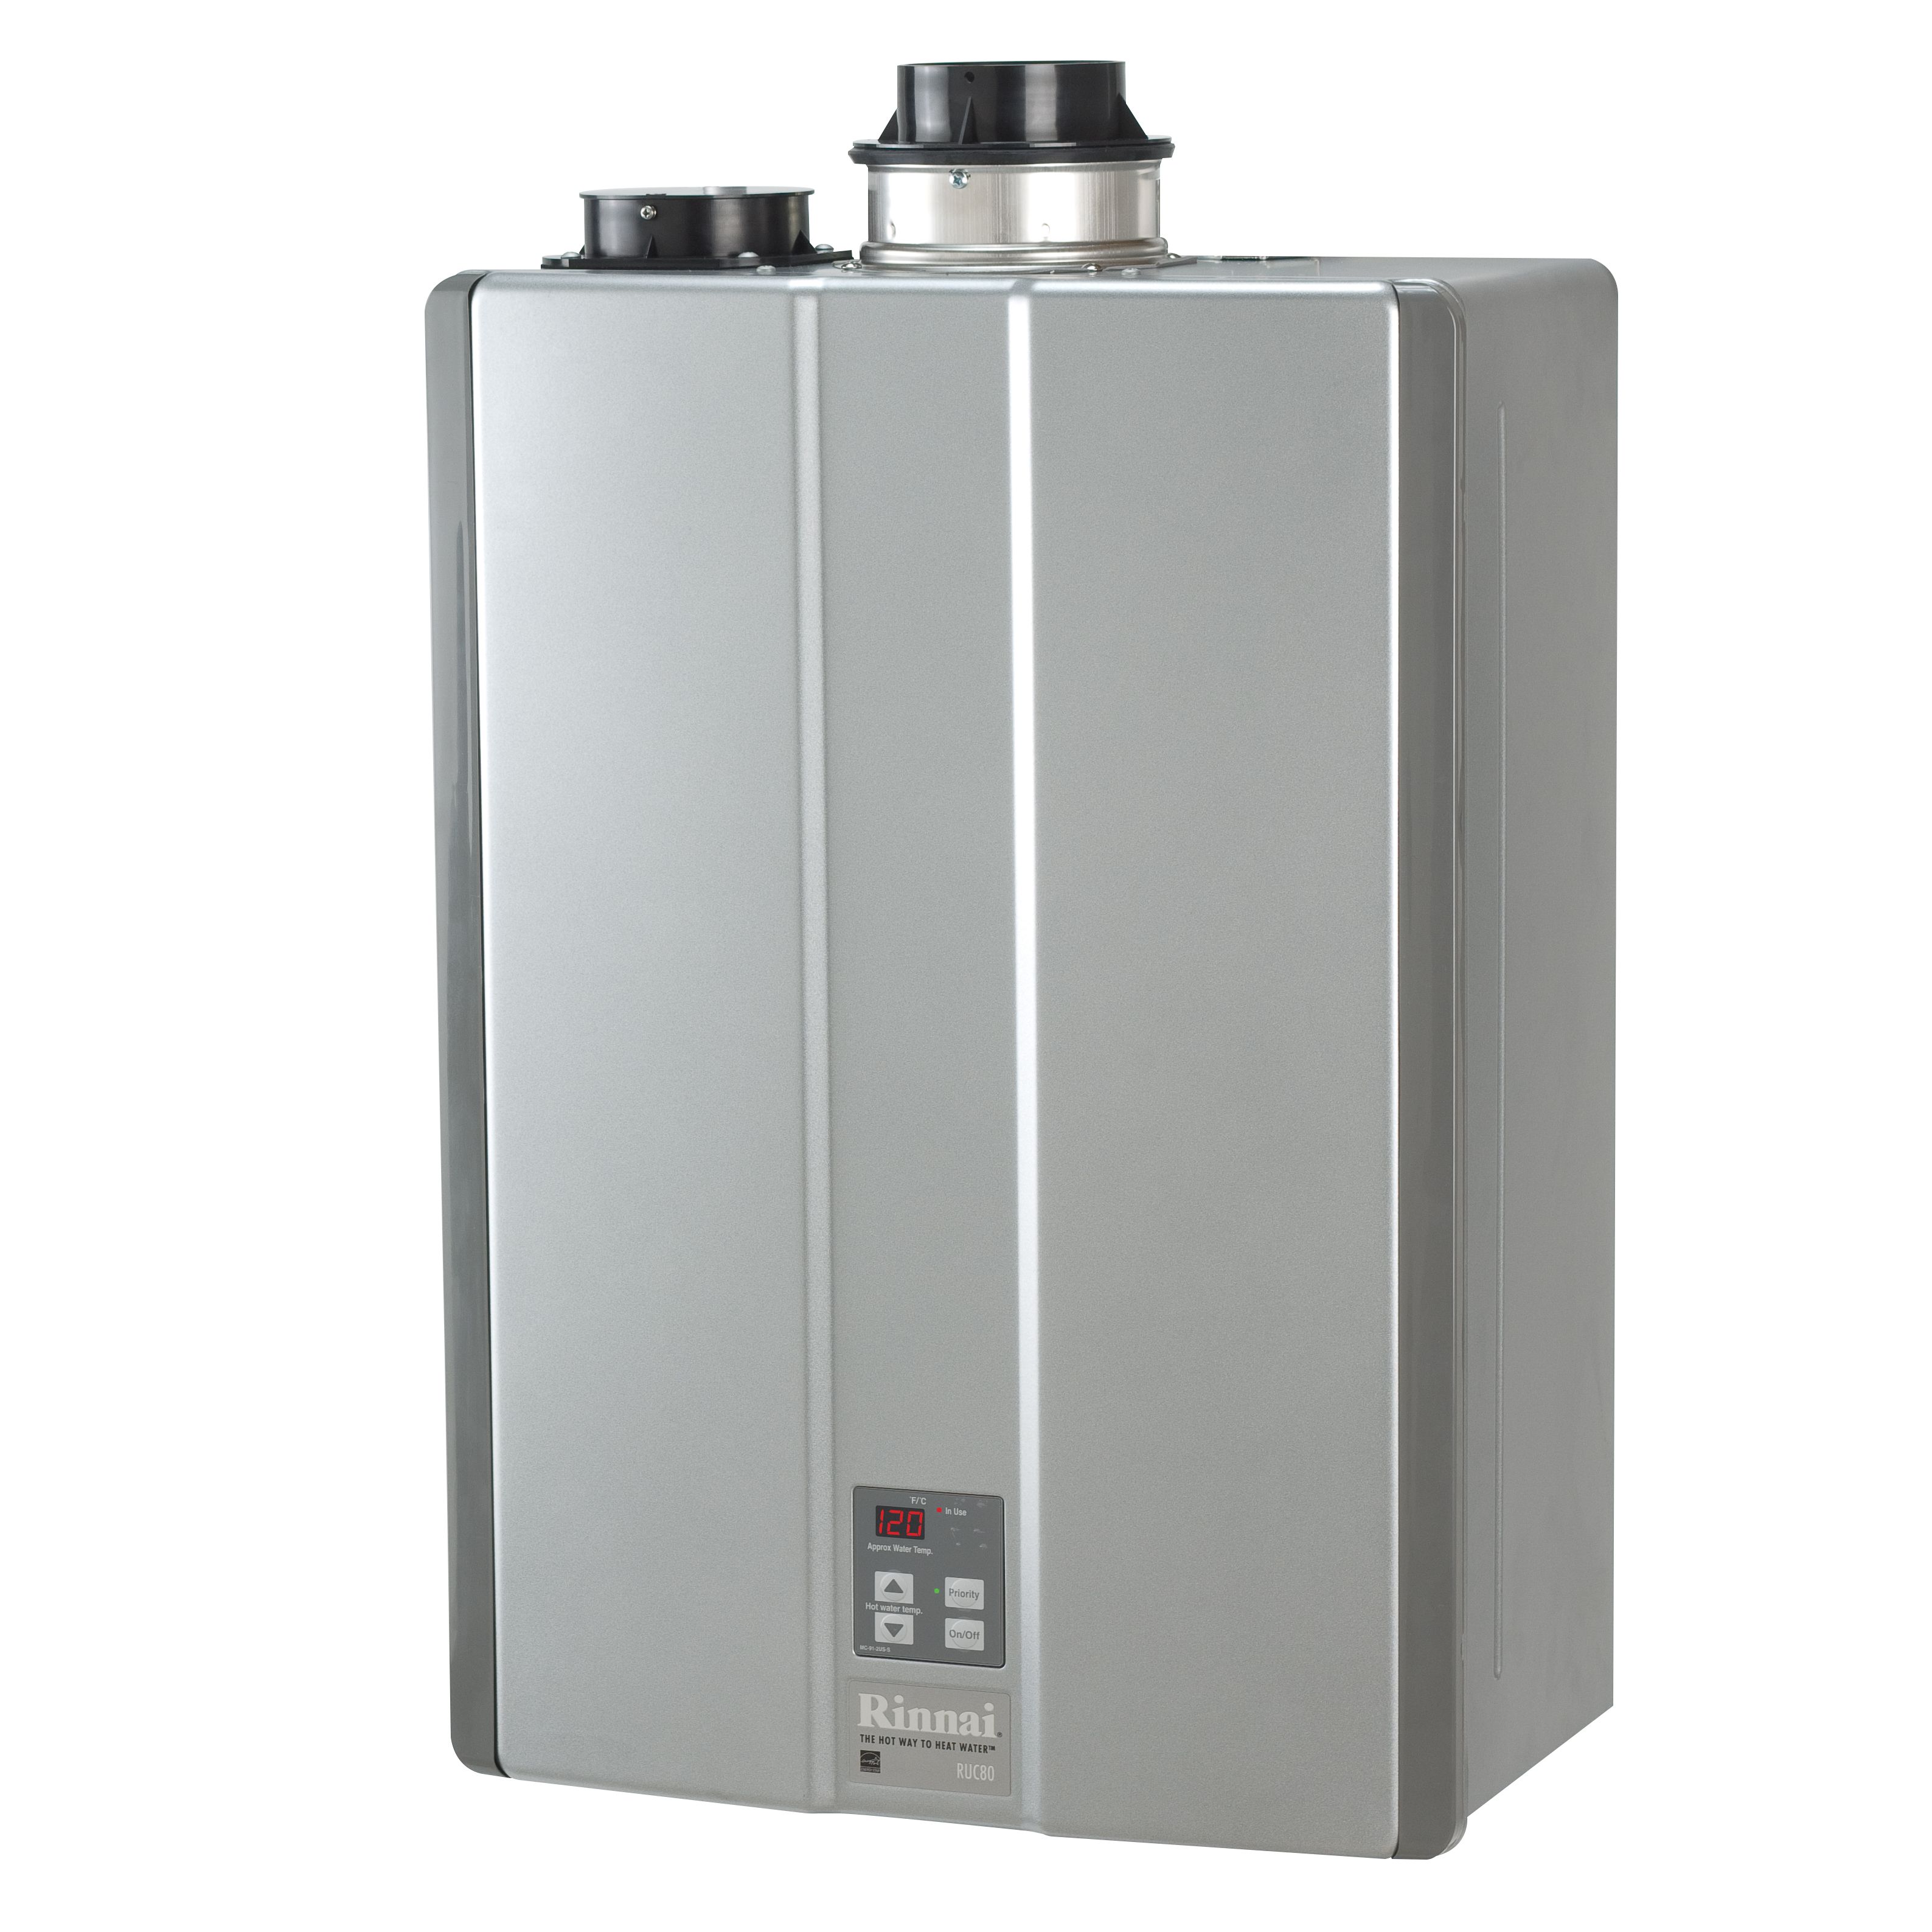 rinnai-condensing-tankless-water-heater-rc98-natural-choice-heating